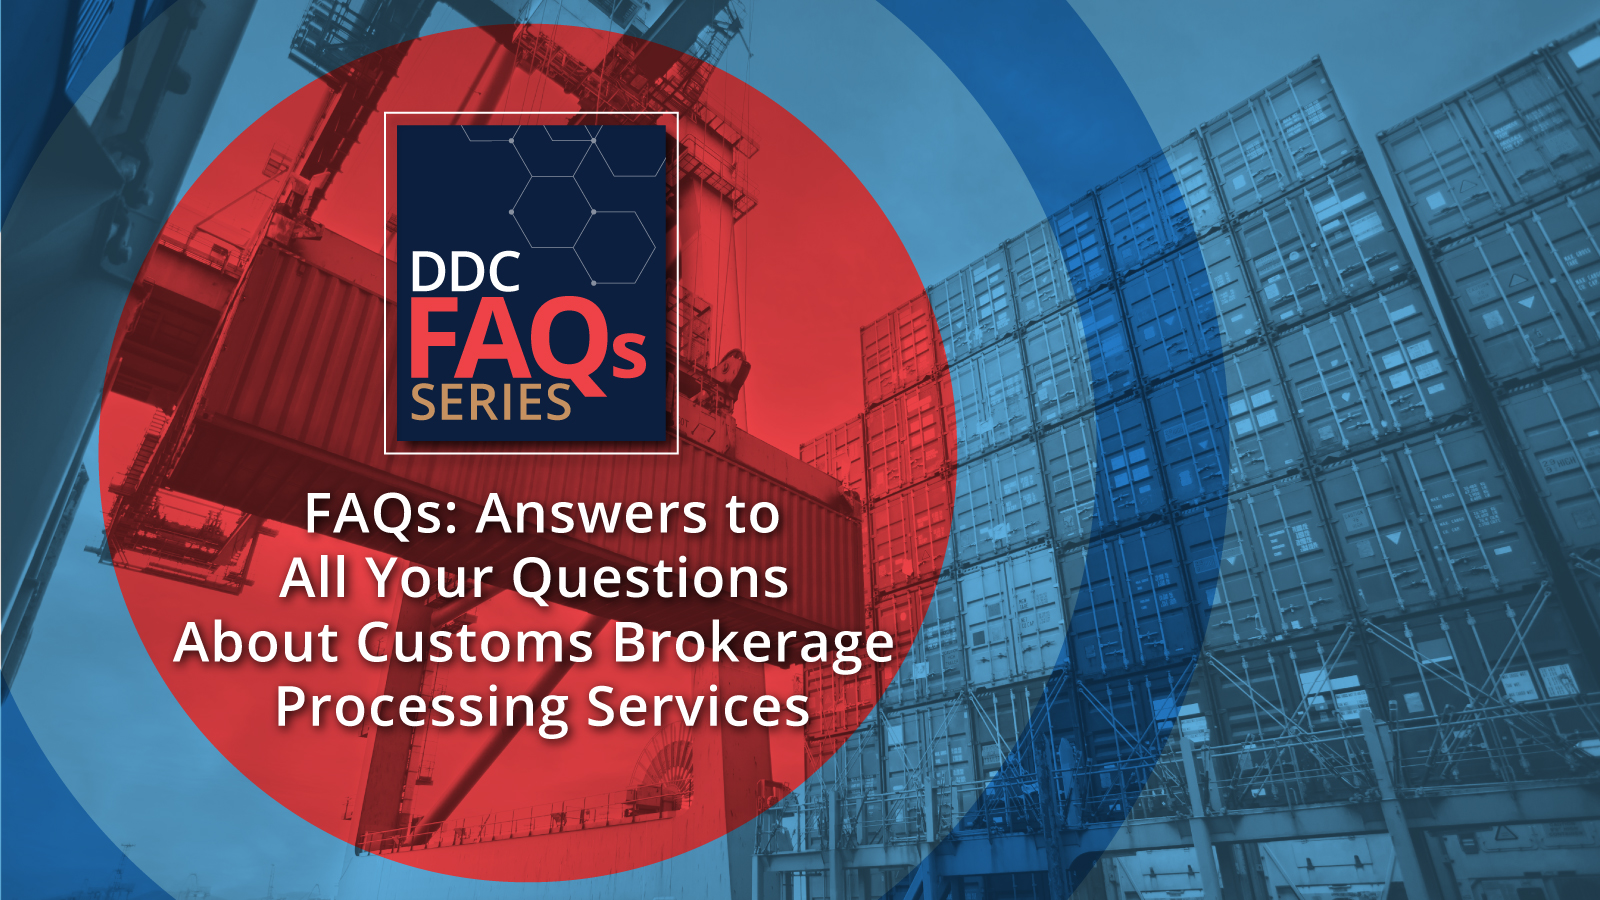 FAQs: Answers to All Your Questions About Customs Brokerage Processing Services